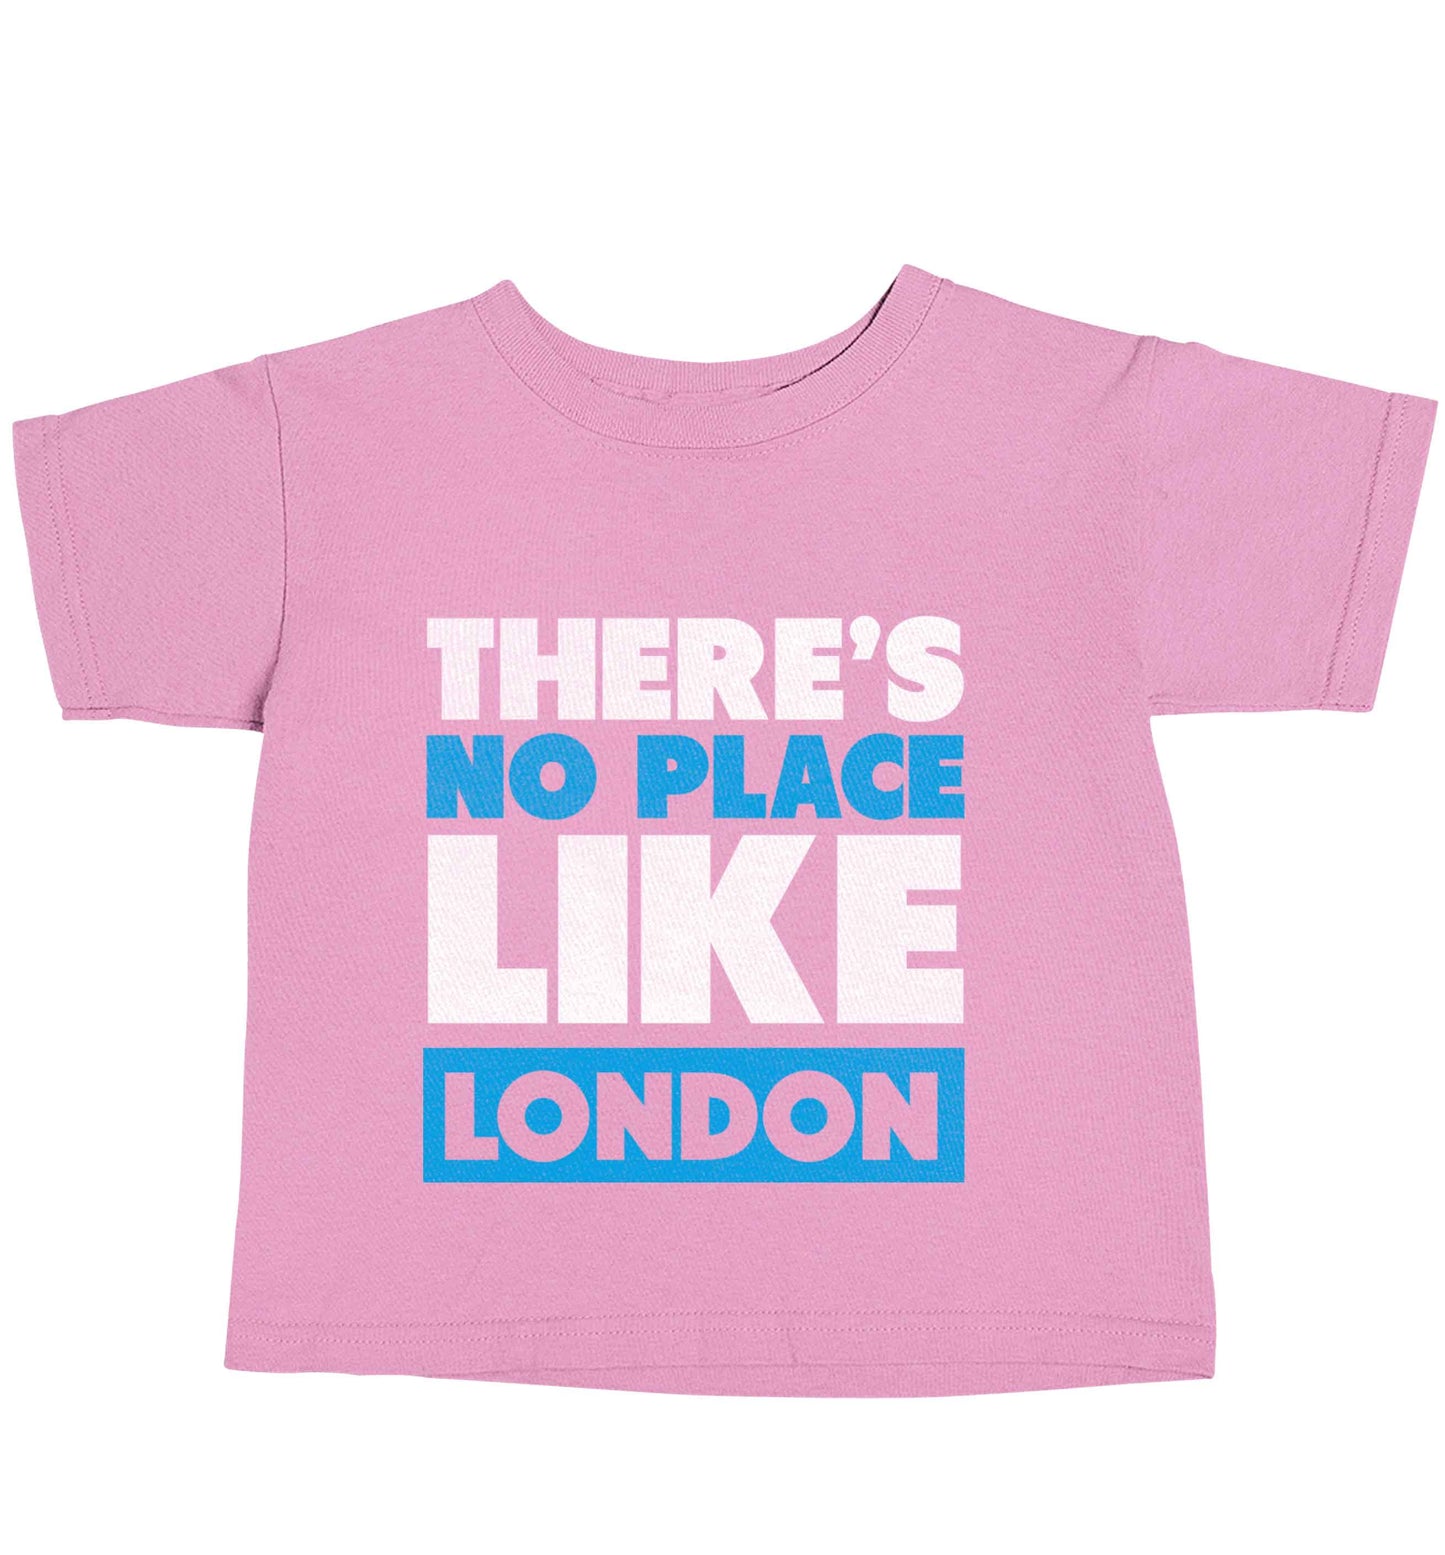 There's no place like England light pink baby toddler Tshirt 2 Years